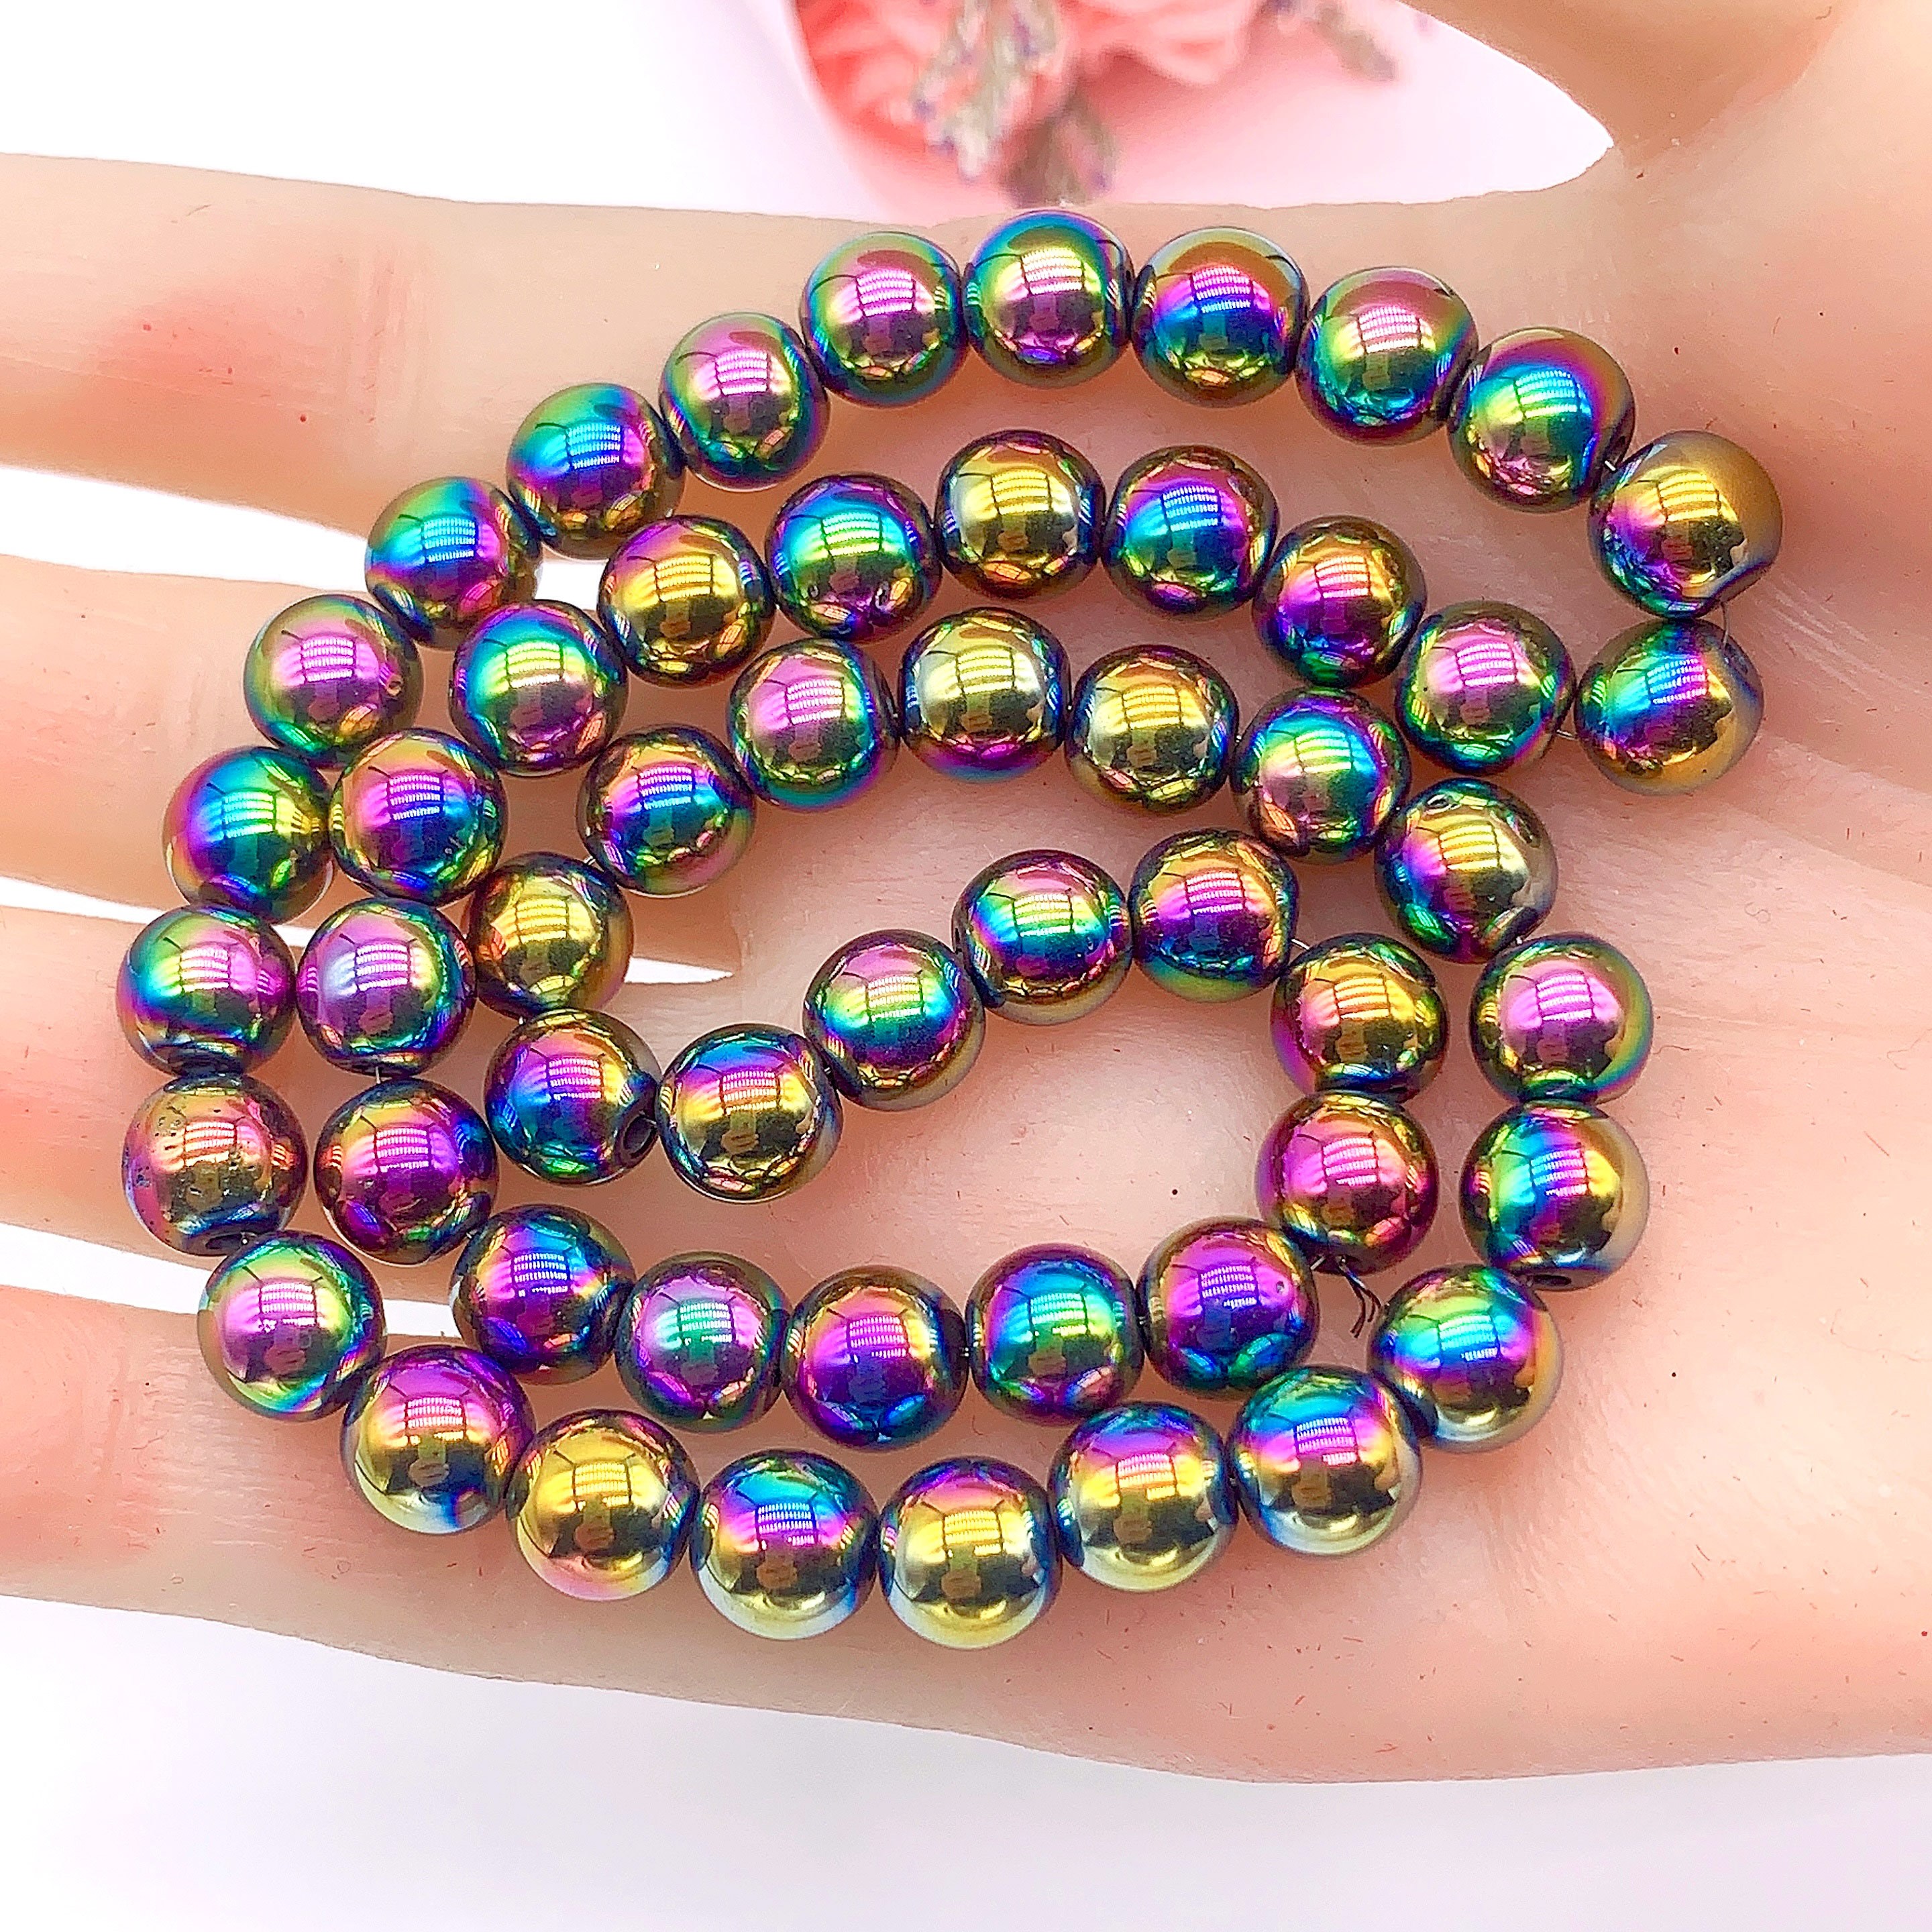 Teekos WLYeeS Nano Colorful Round Bead Plating Natural Hematite Spacer  Loose Beads for Jewelry Bracelet Necklace Making DIY 2 3 4 6 8mm - (Color